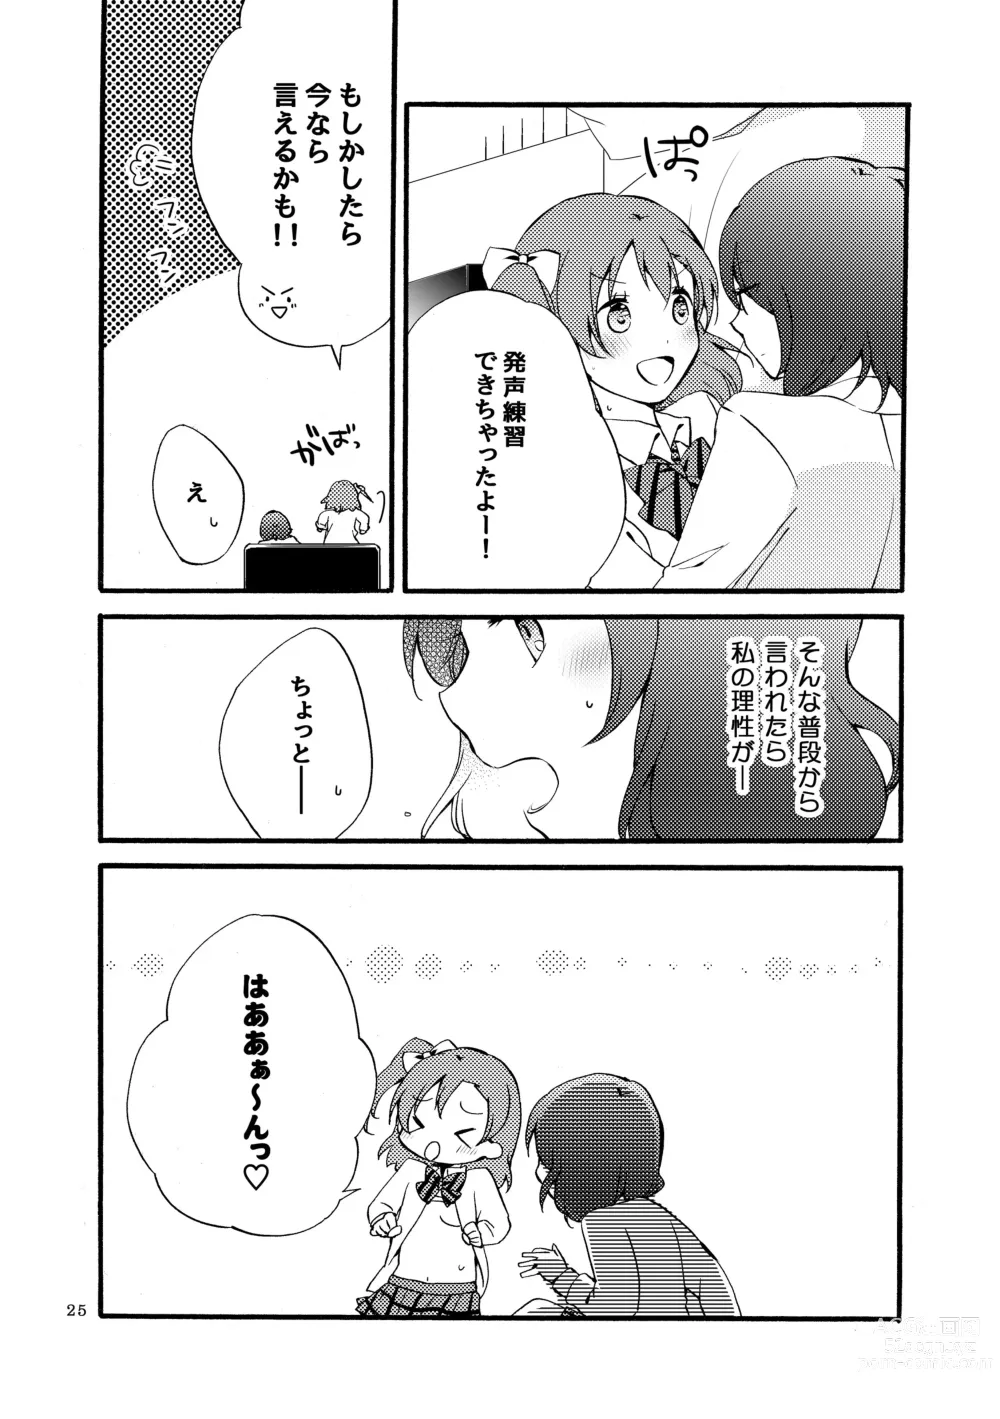 Page 24 of doujinshi Nishikino-shiki Hassei Renshuu - What are the contents of this vocal exercises?